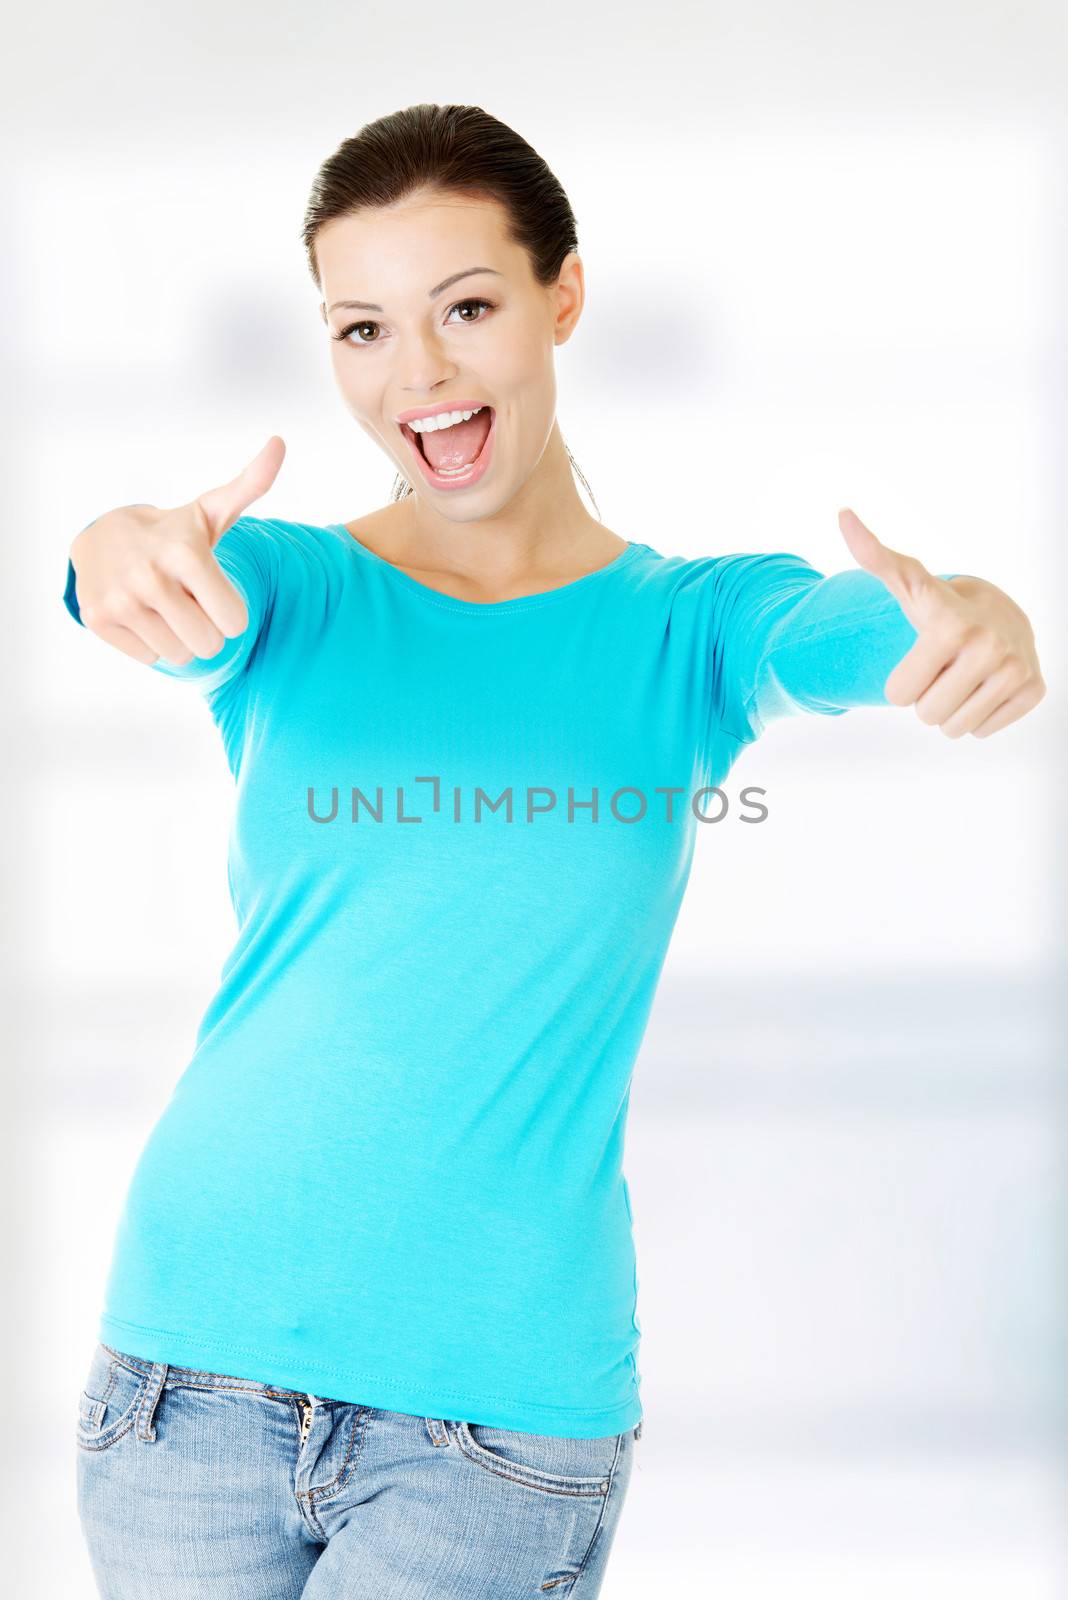 Woman in casual clothes gesturing thumbs up. by BDS